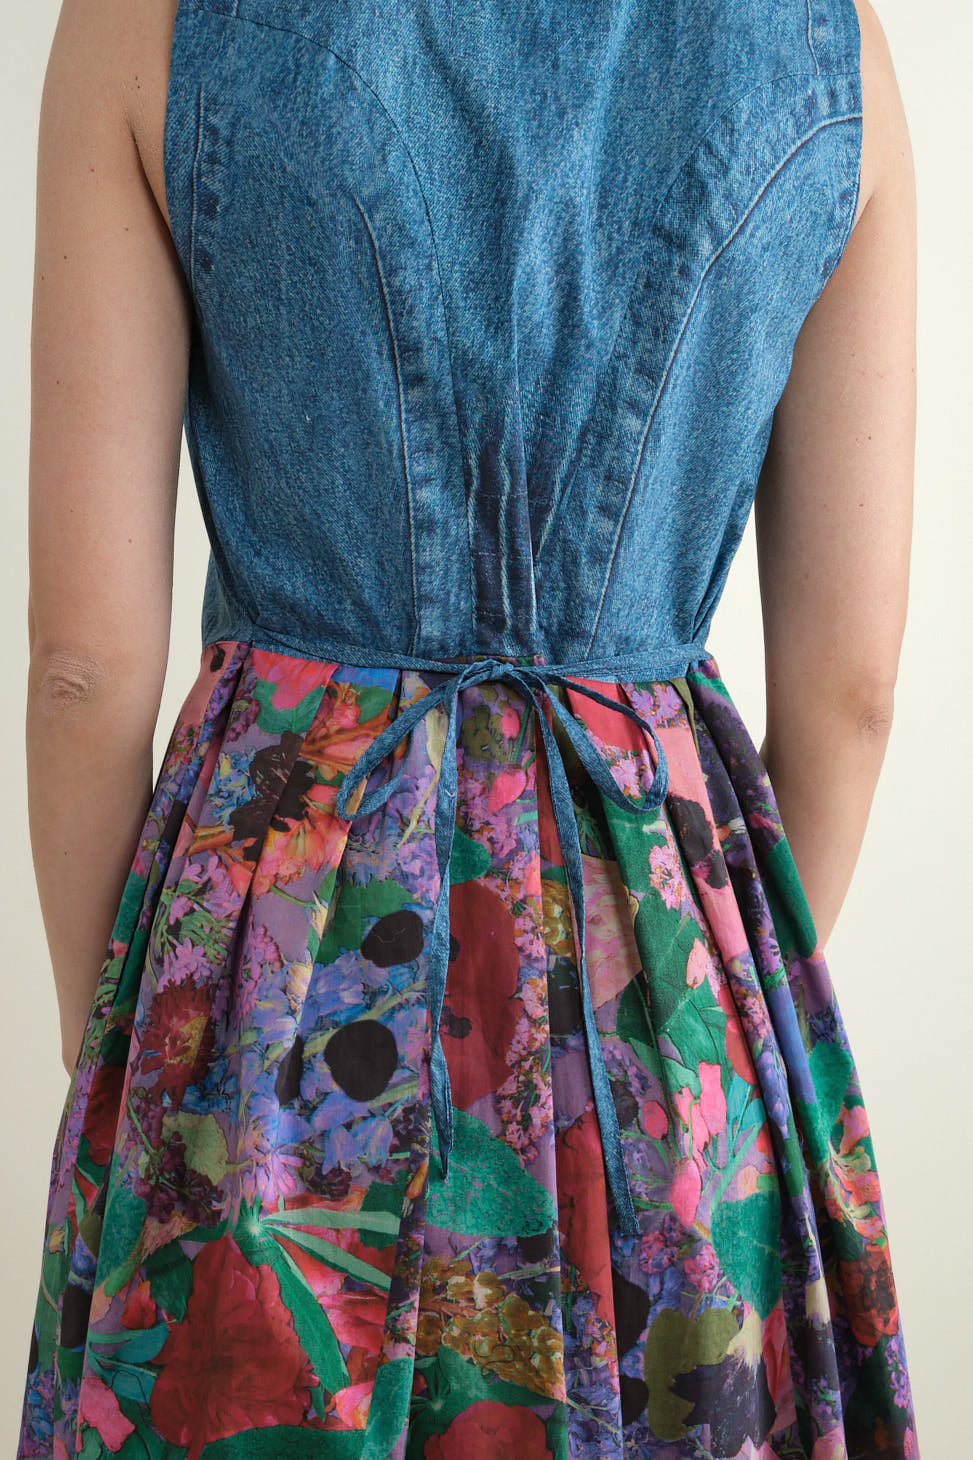 Back tie on Sleeveless Dress in Jeans and Flowers